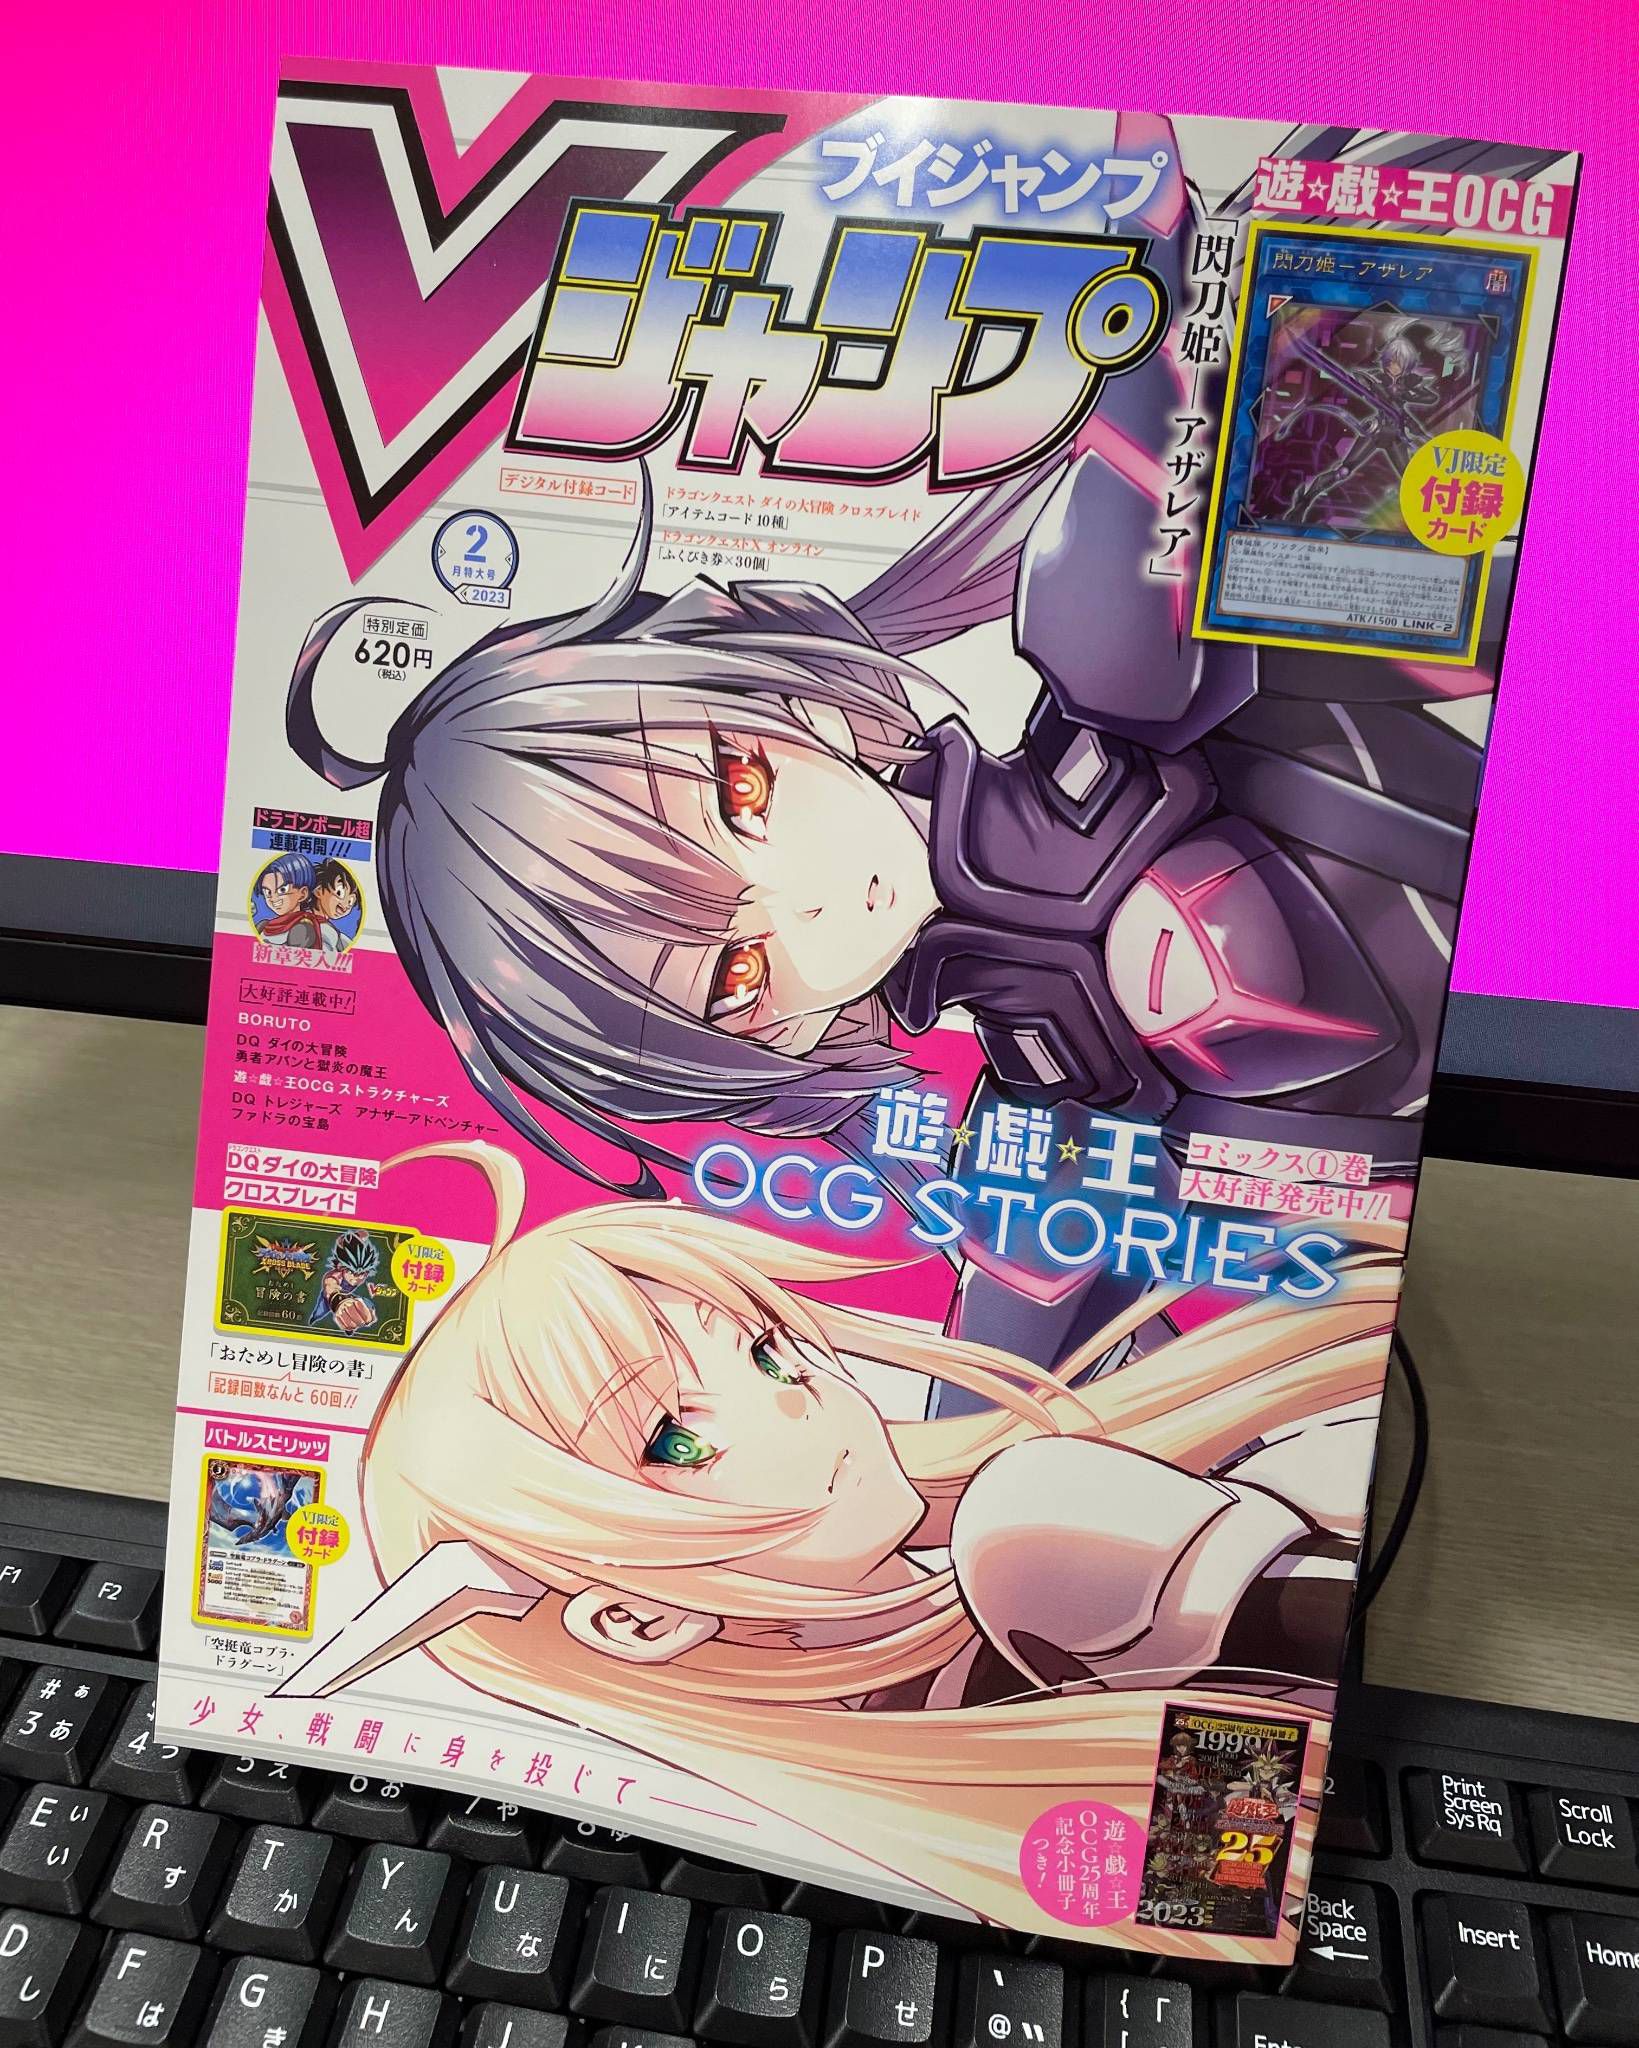 【Image】The cover of V Jump released today is kind of erotic 1